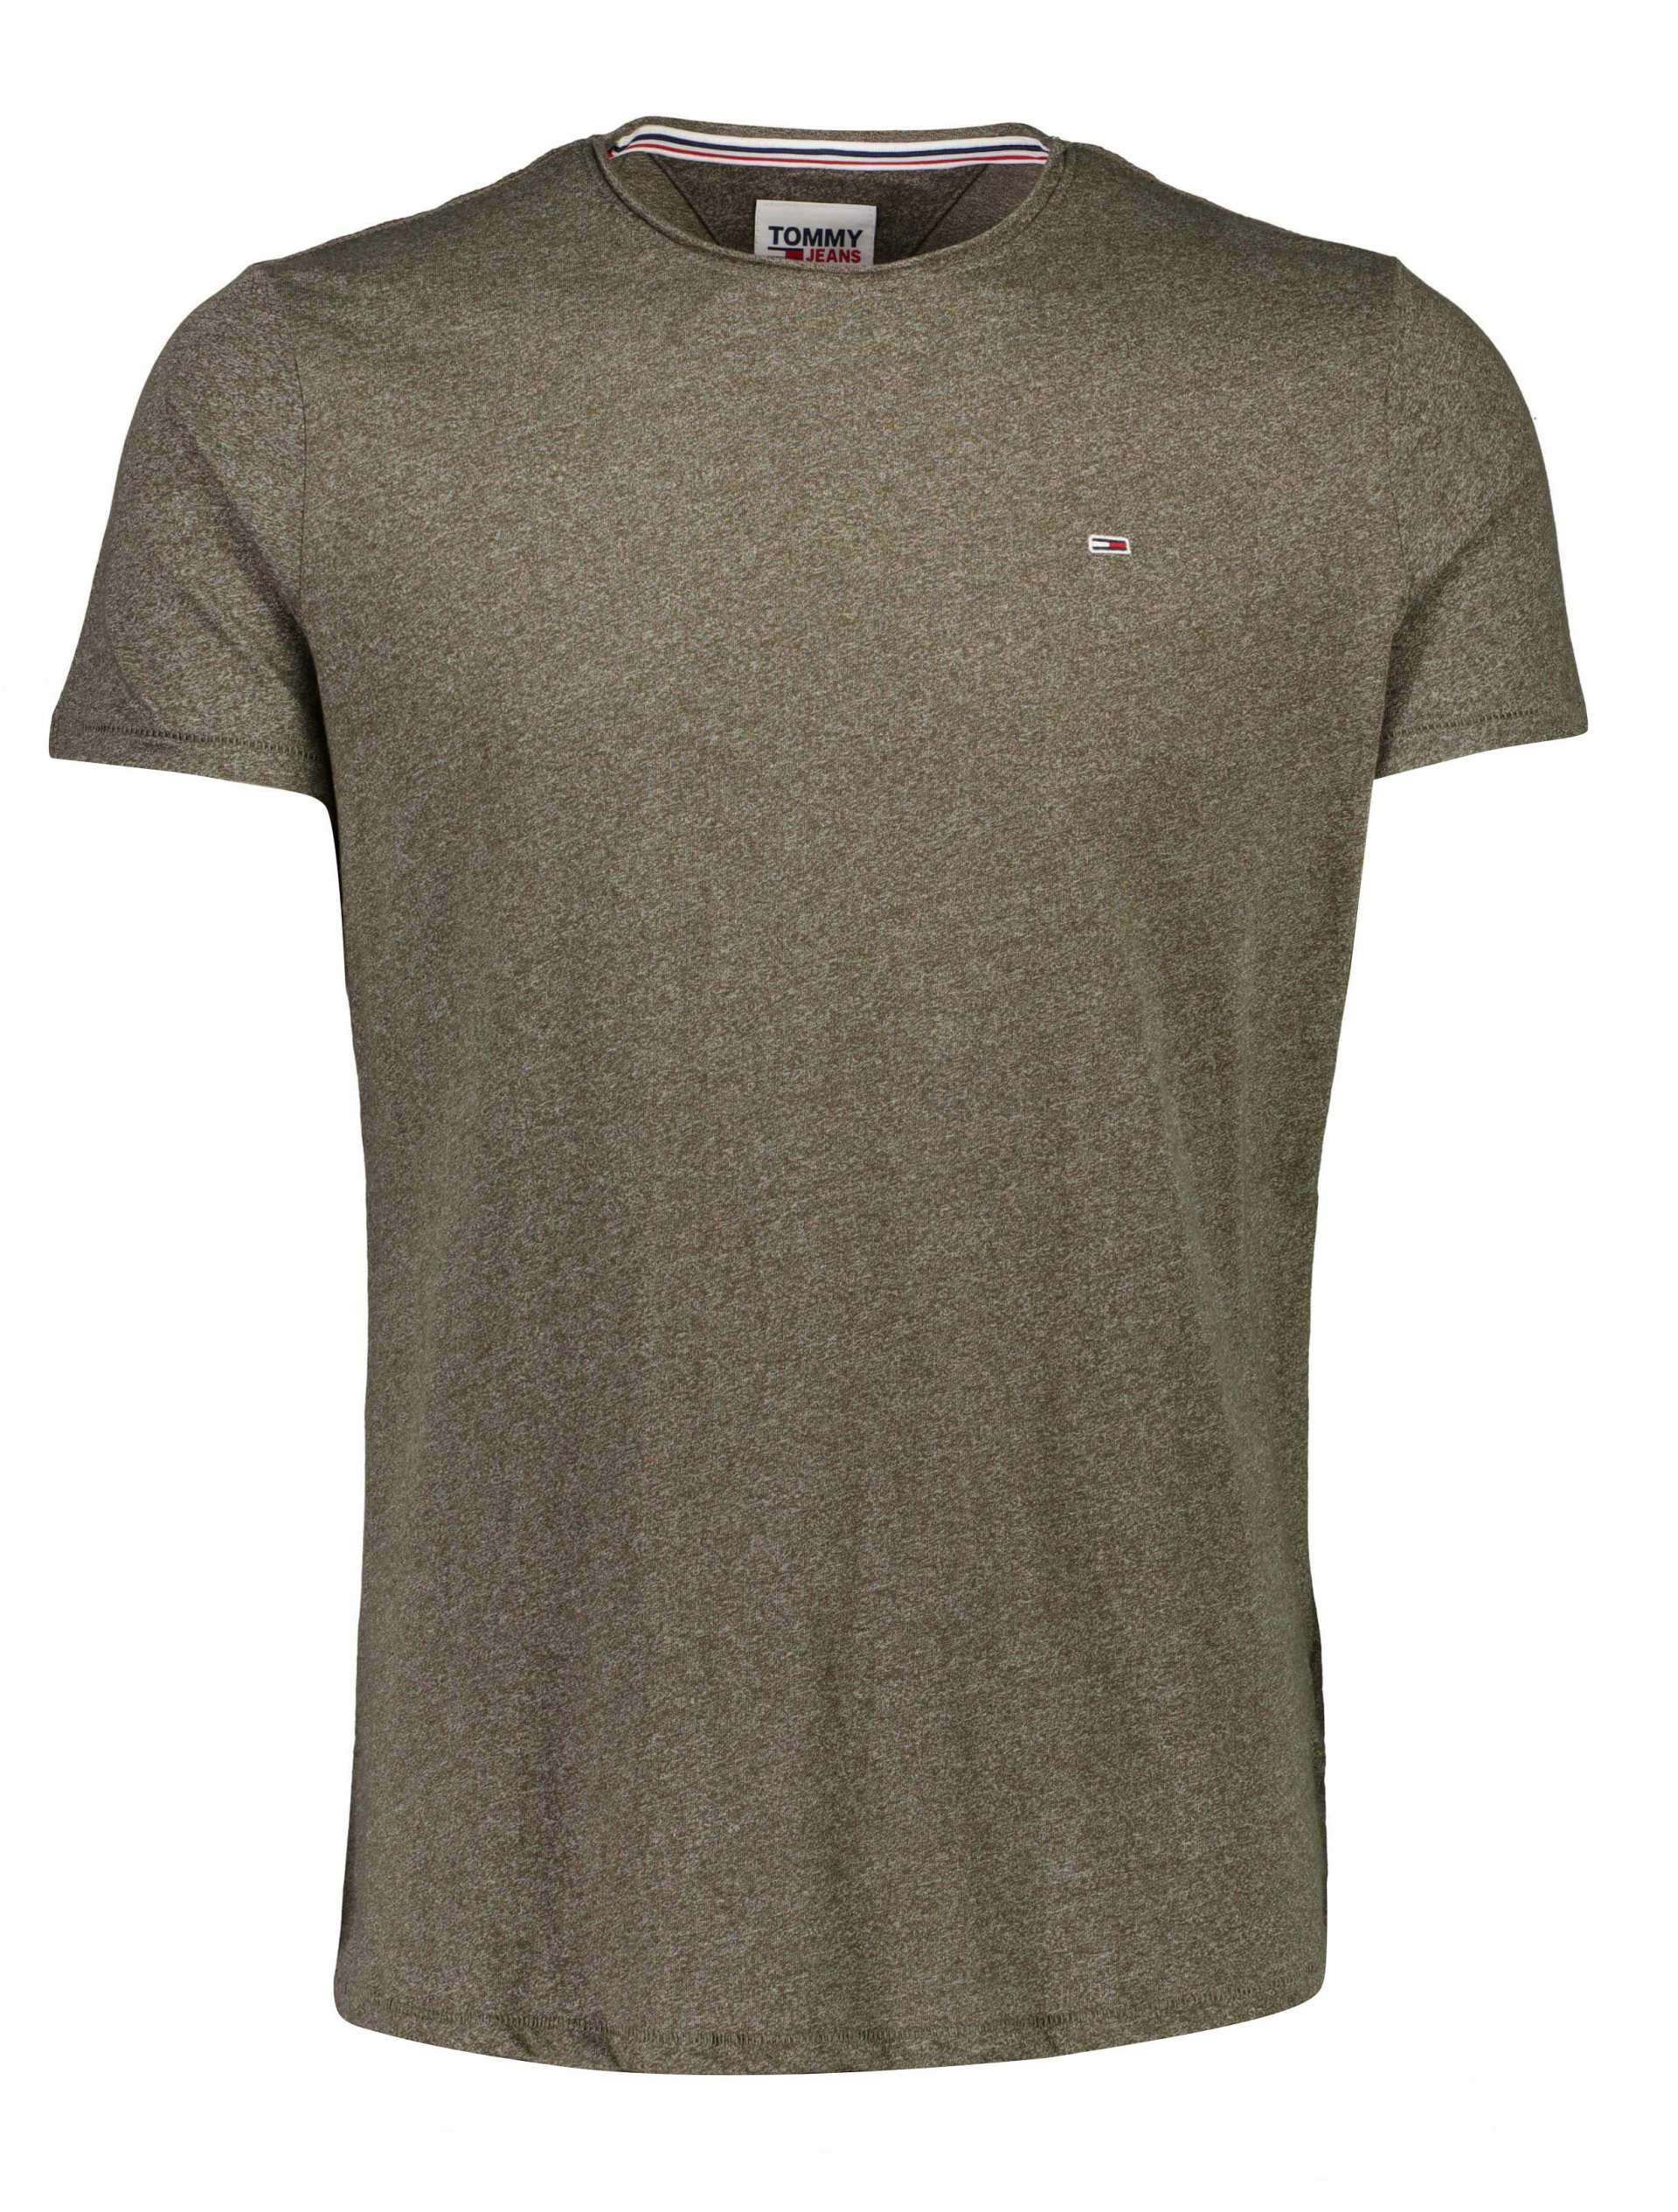 Tommy Jeans T-shirt grøn / mmo olive